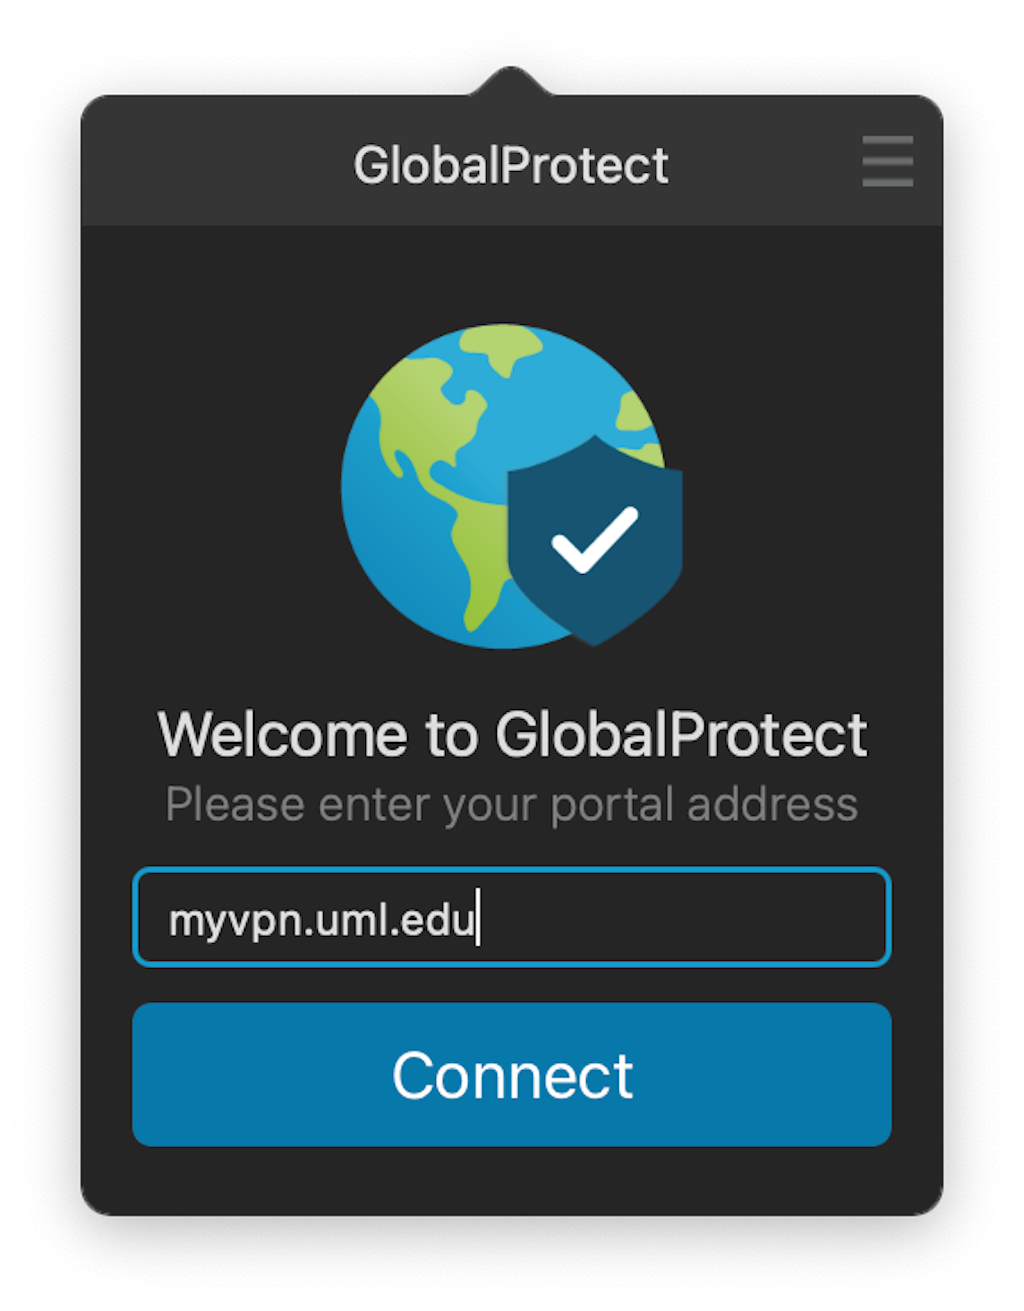 GlobalProtect icon with text:  Welcome to GlobalProtect Please enter your portal address. Box with myvpn.uml.edu and button labeled Connect.